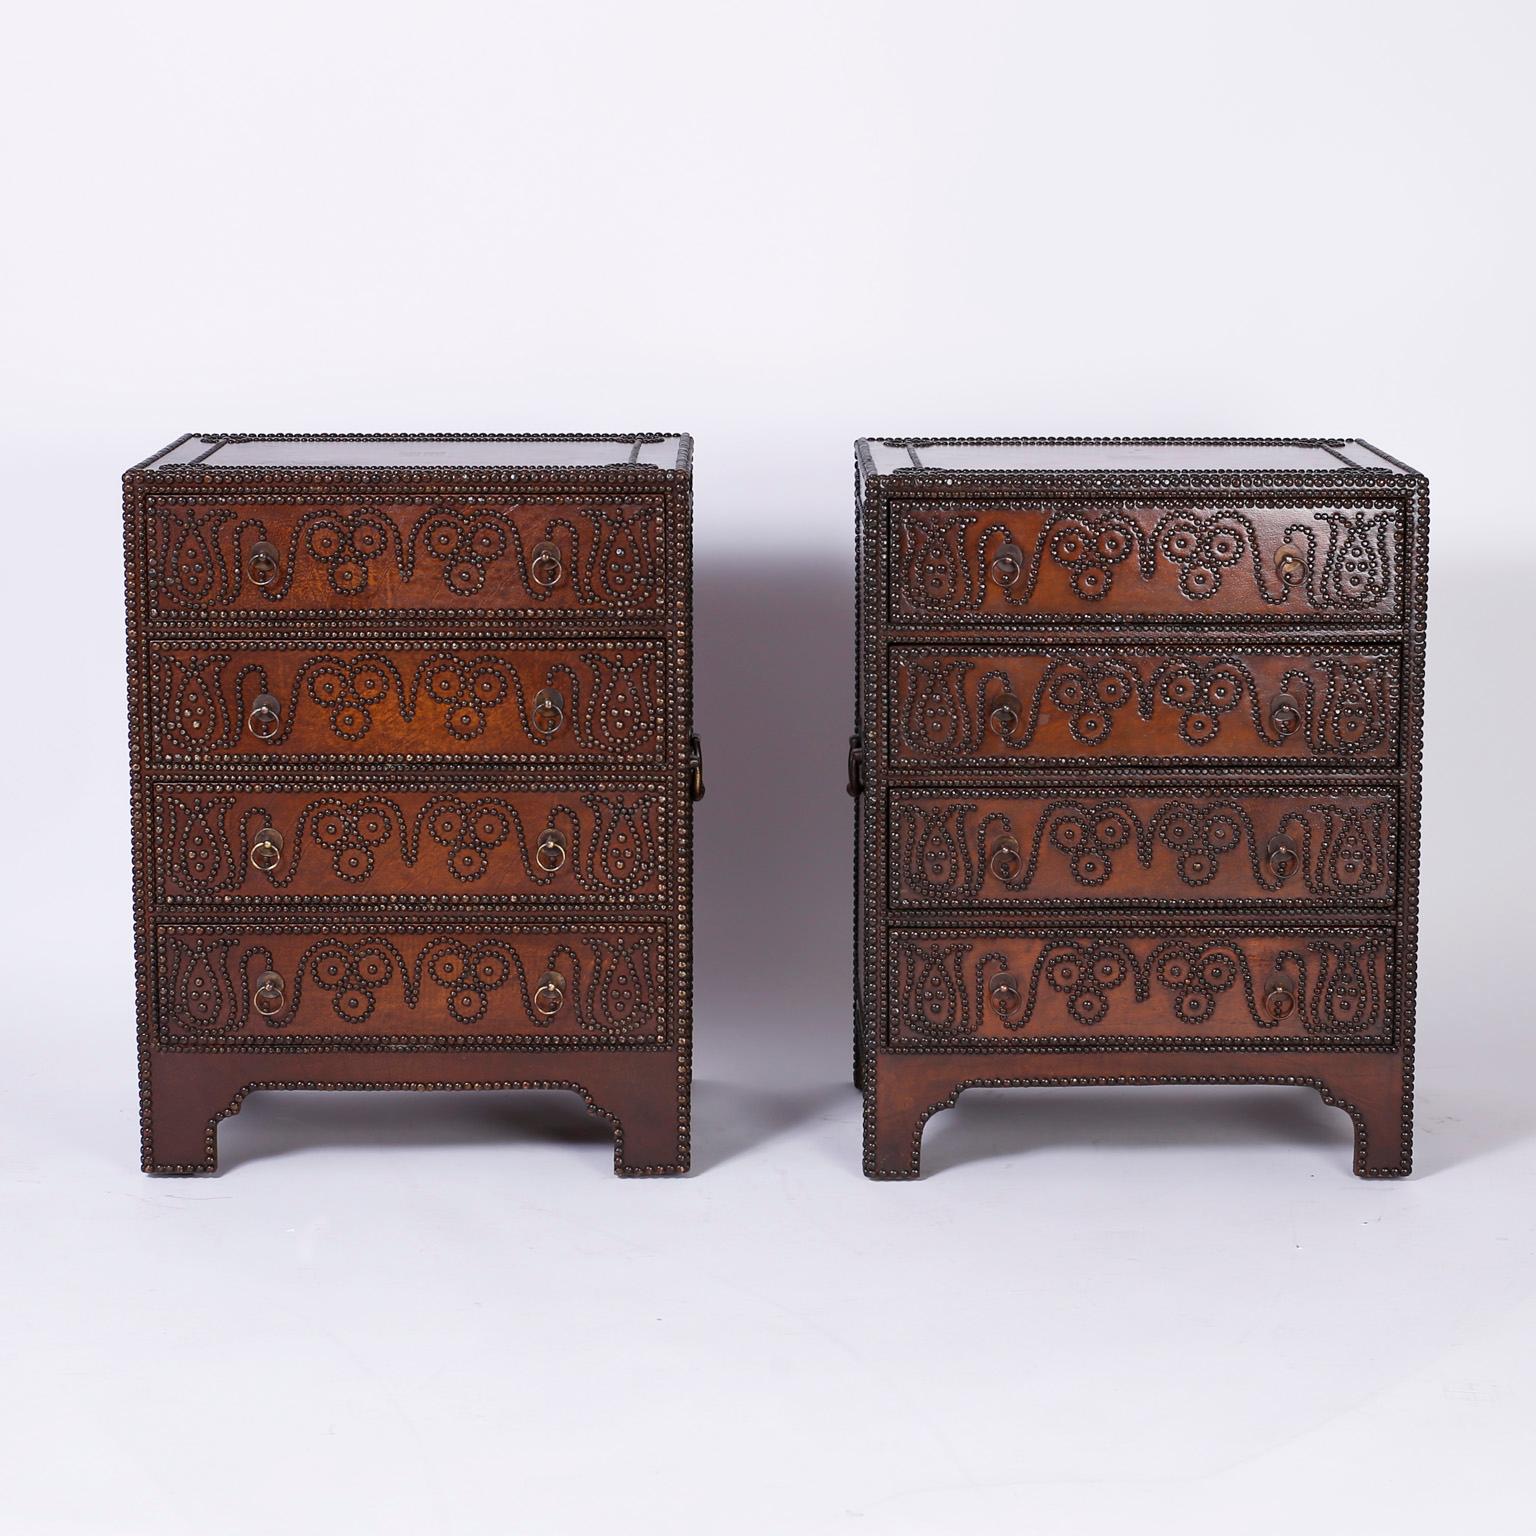 Pair of Anglo-Indian brown leather clad chests with a unique display of studded floral and geometric designs on the top, front, and sides. The four drawer chests have side handles, confident stance, and modernized bracket feet.